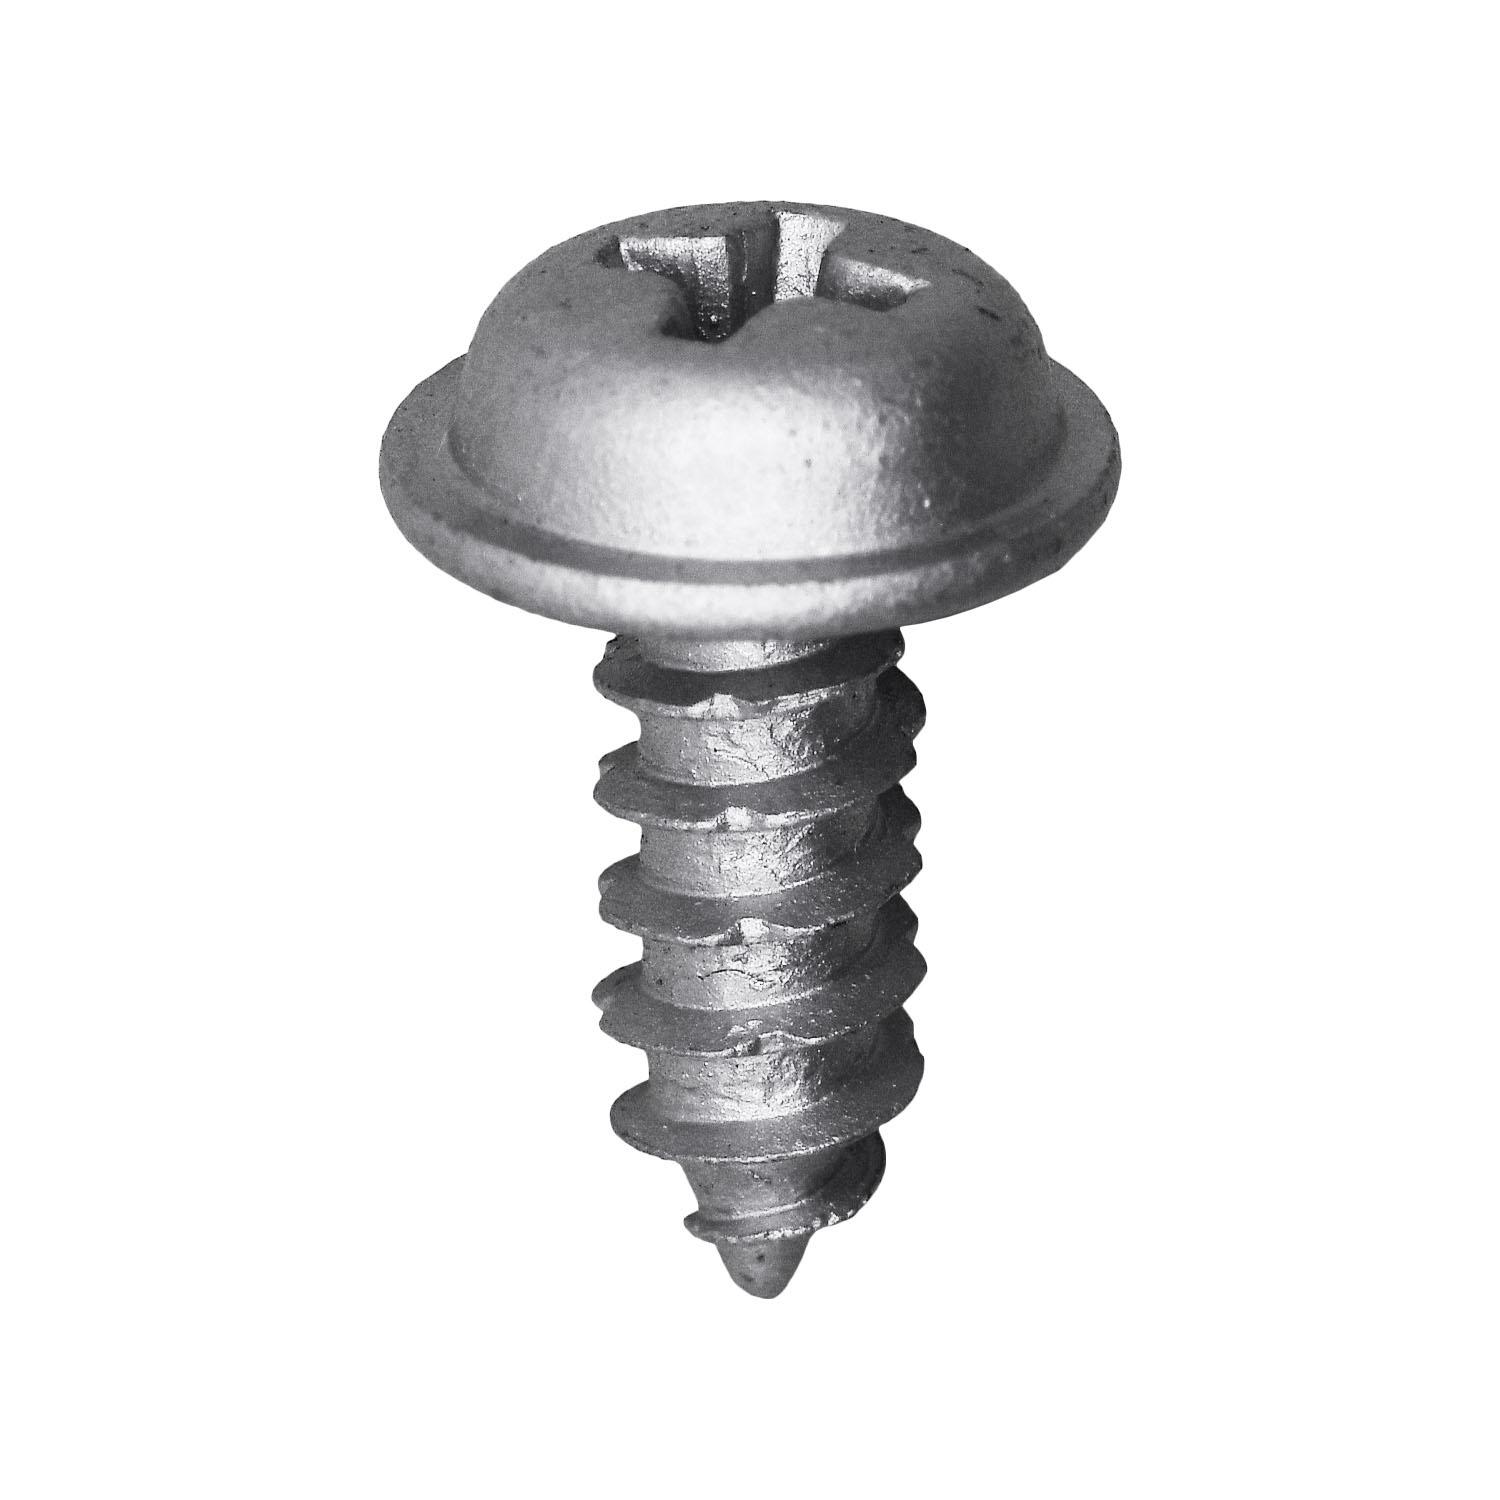 Fog Lamp Phillips Round Washer Head Thread Cutting Tapping Screw